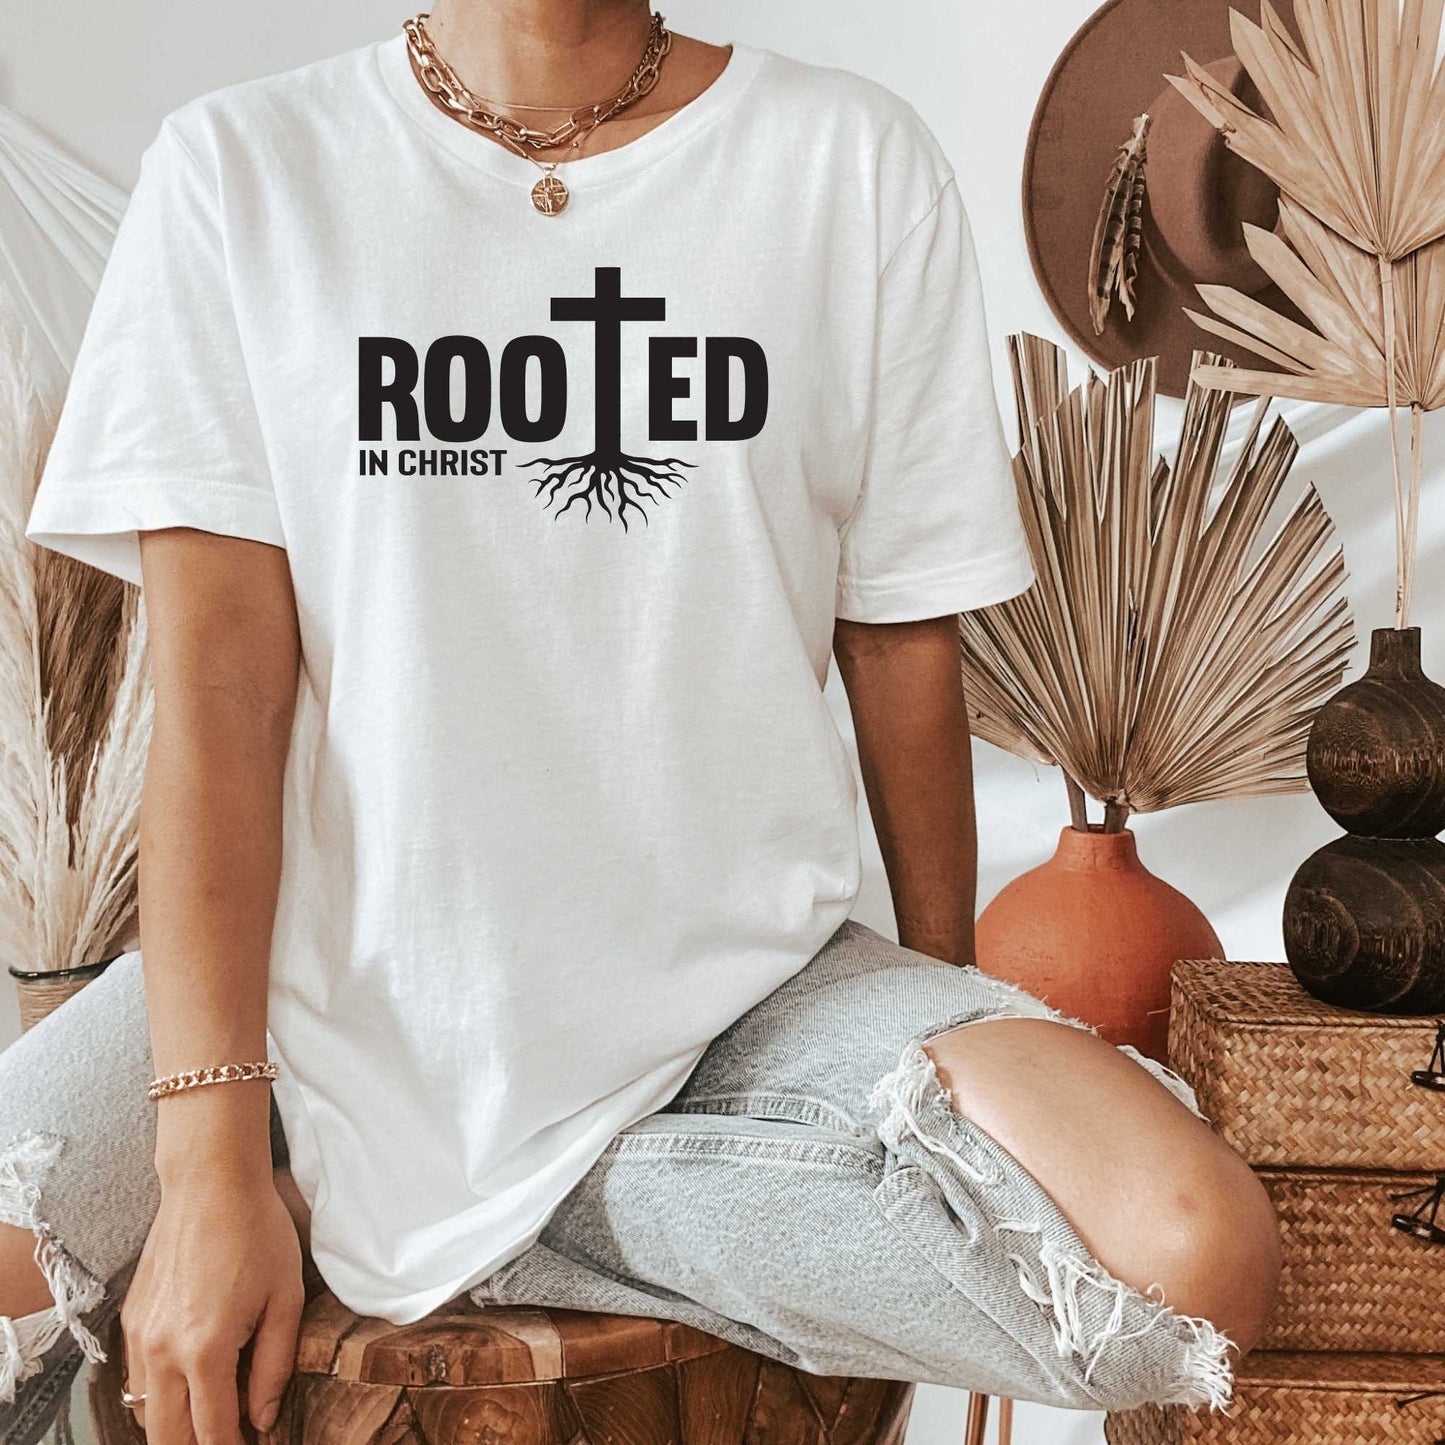 Rooted in Christ Women's Religious Shirts about God